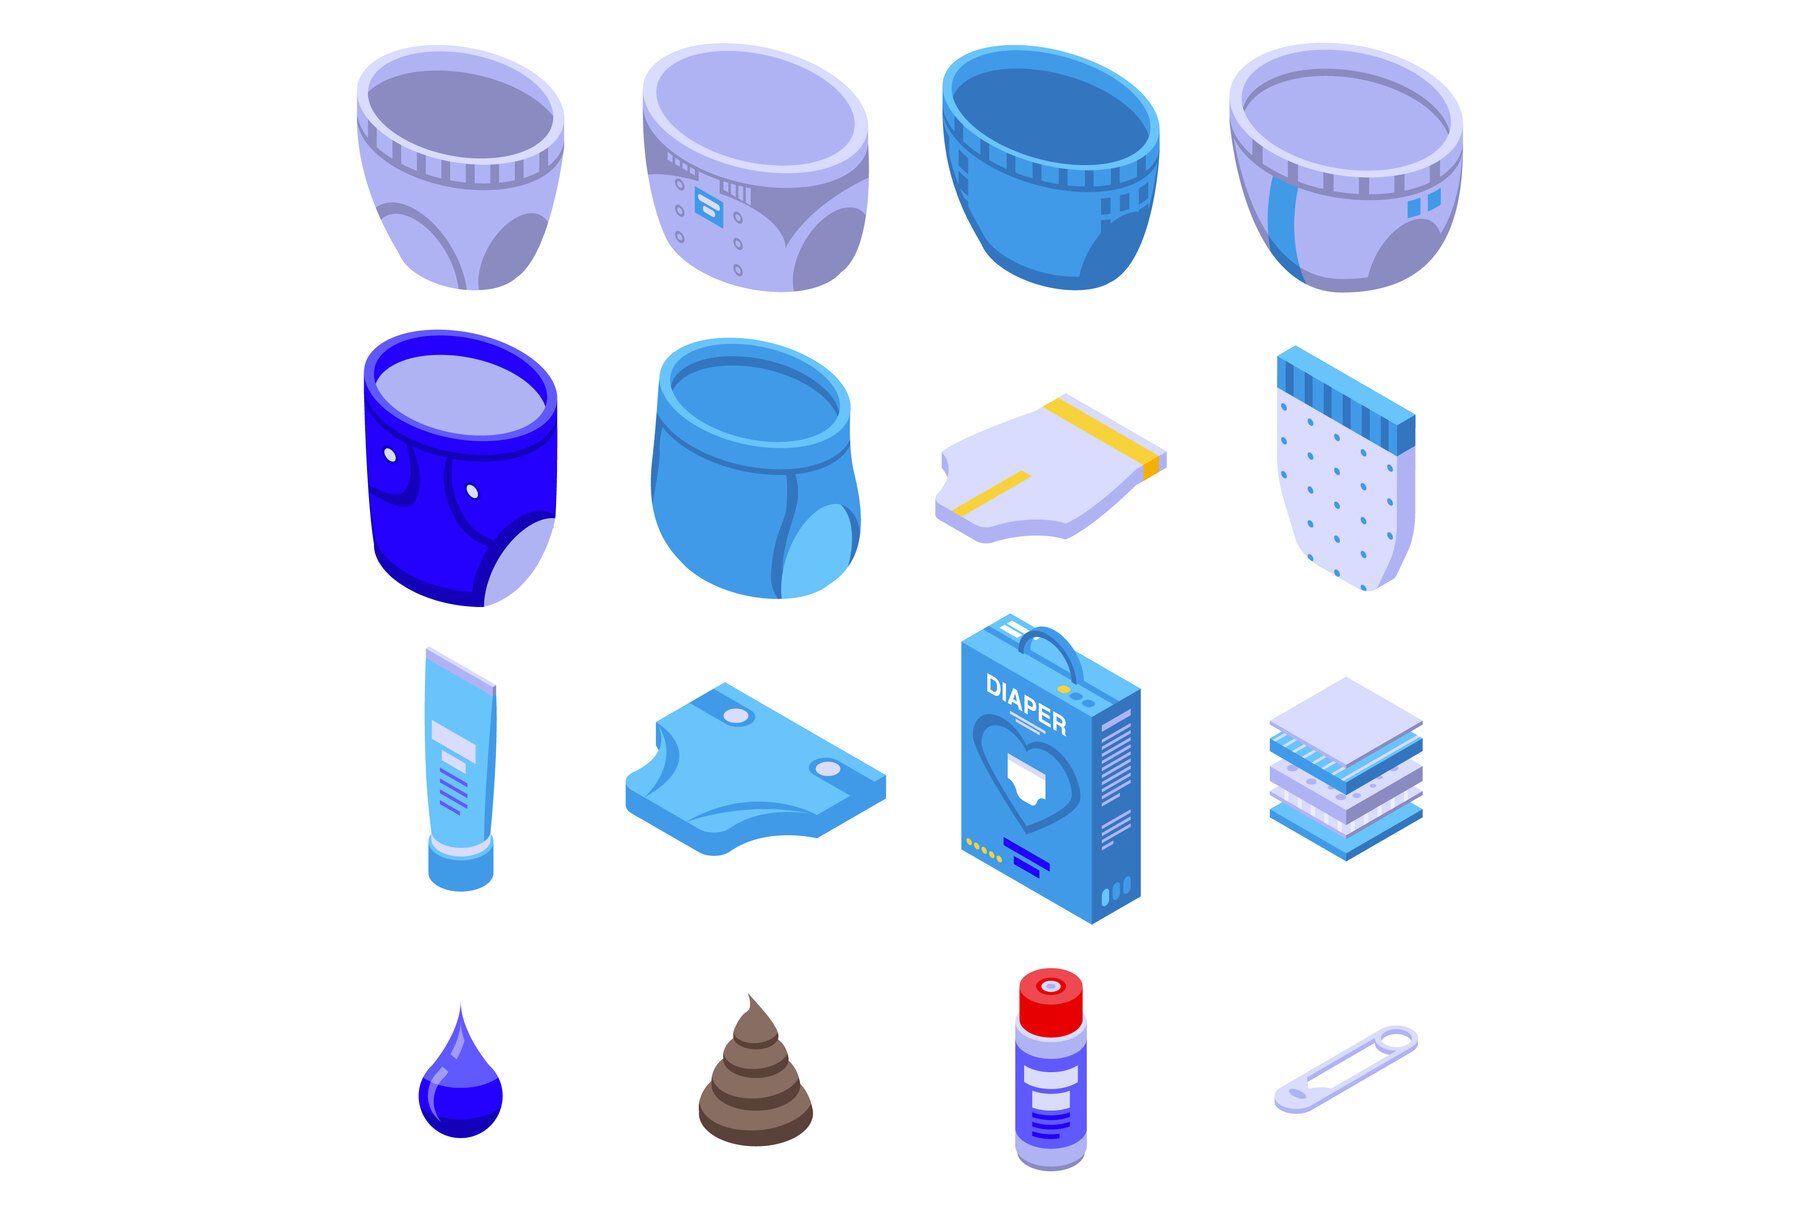 Diaper icons set, isometric style cover image.